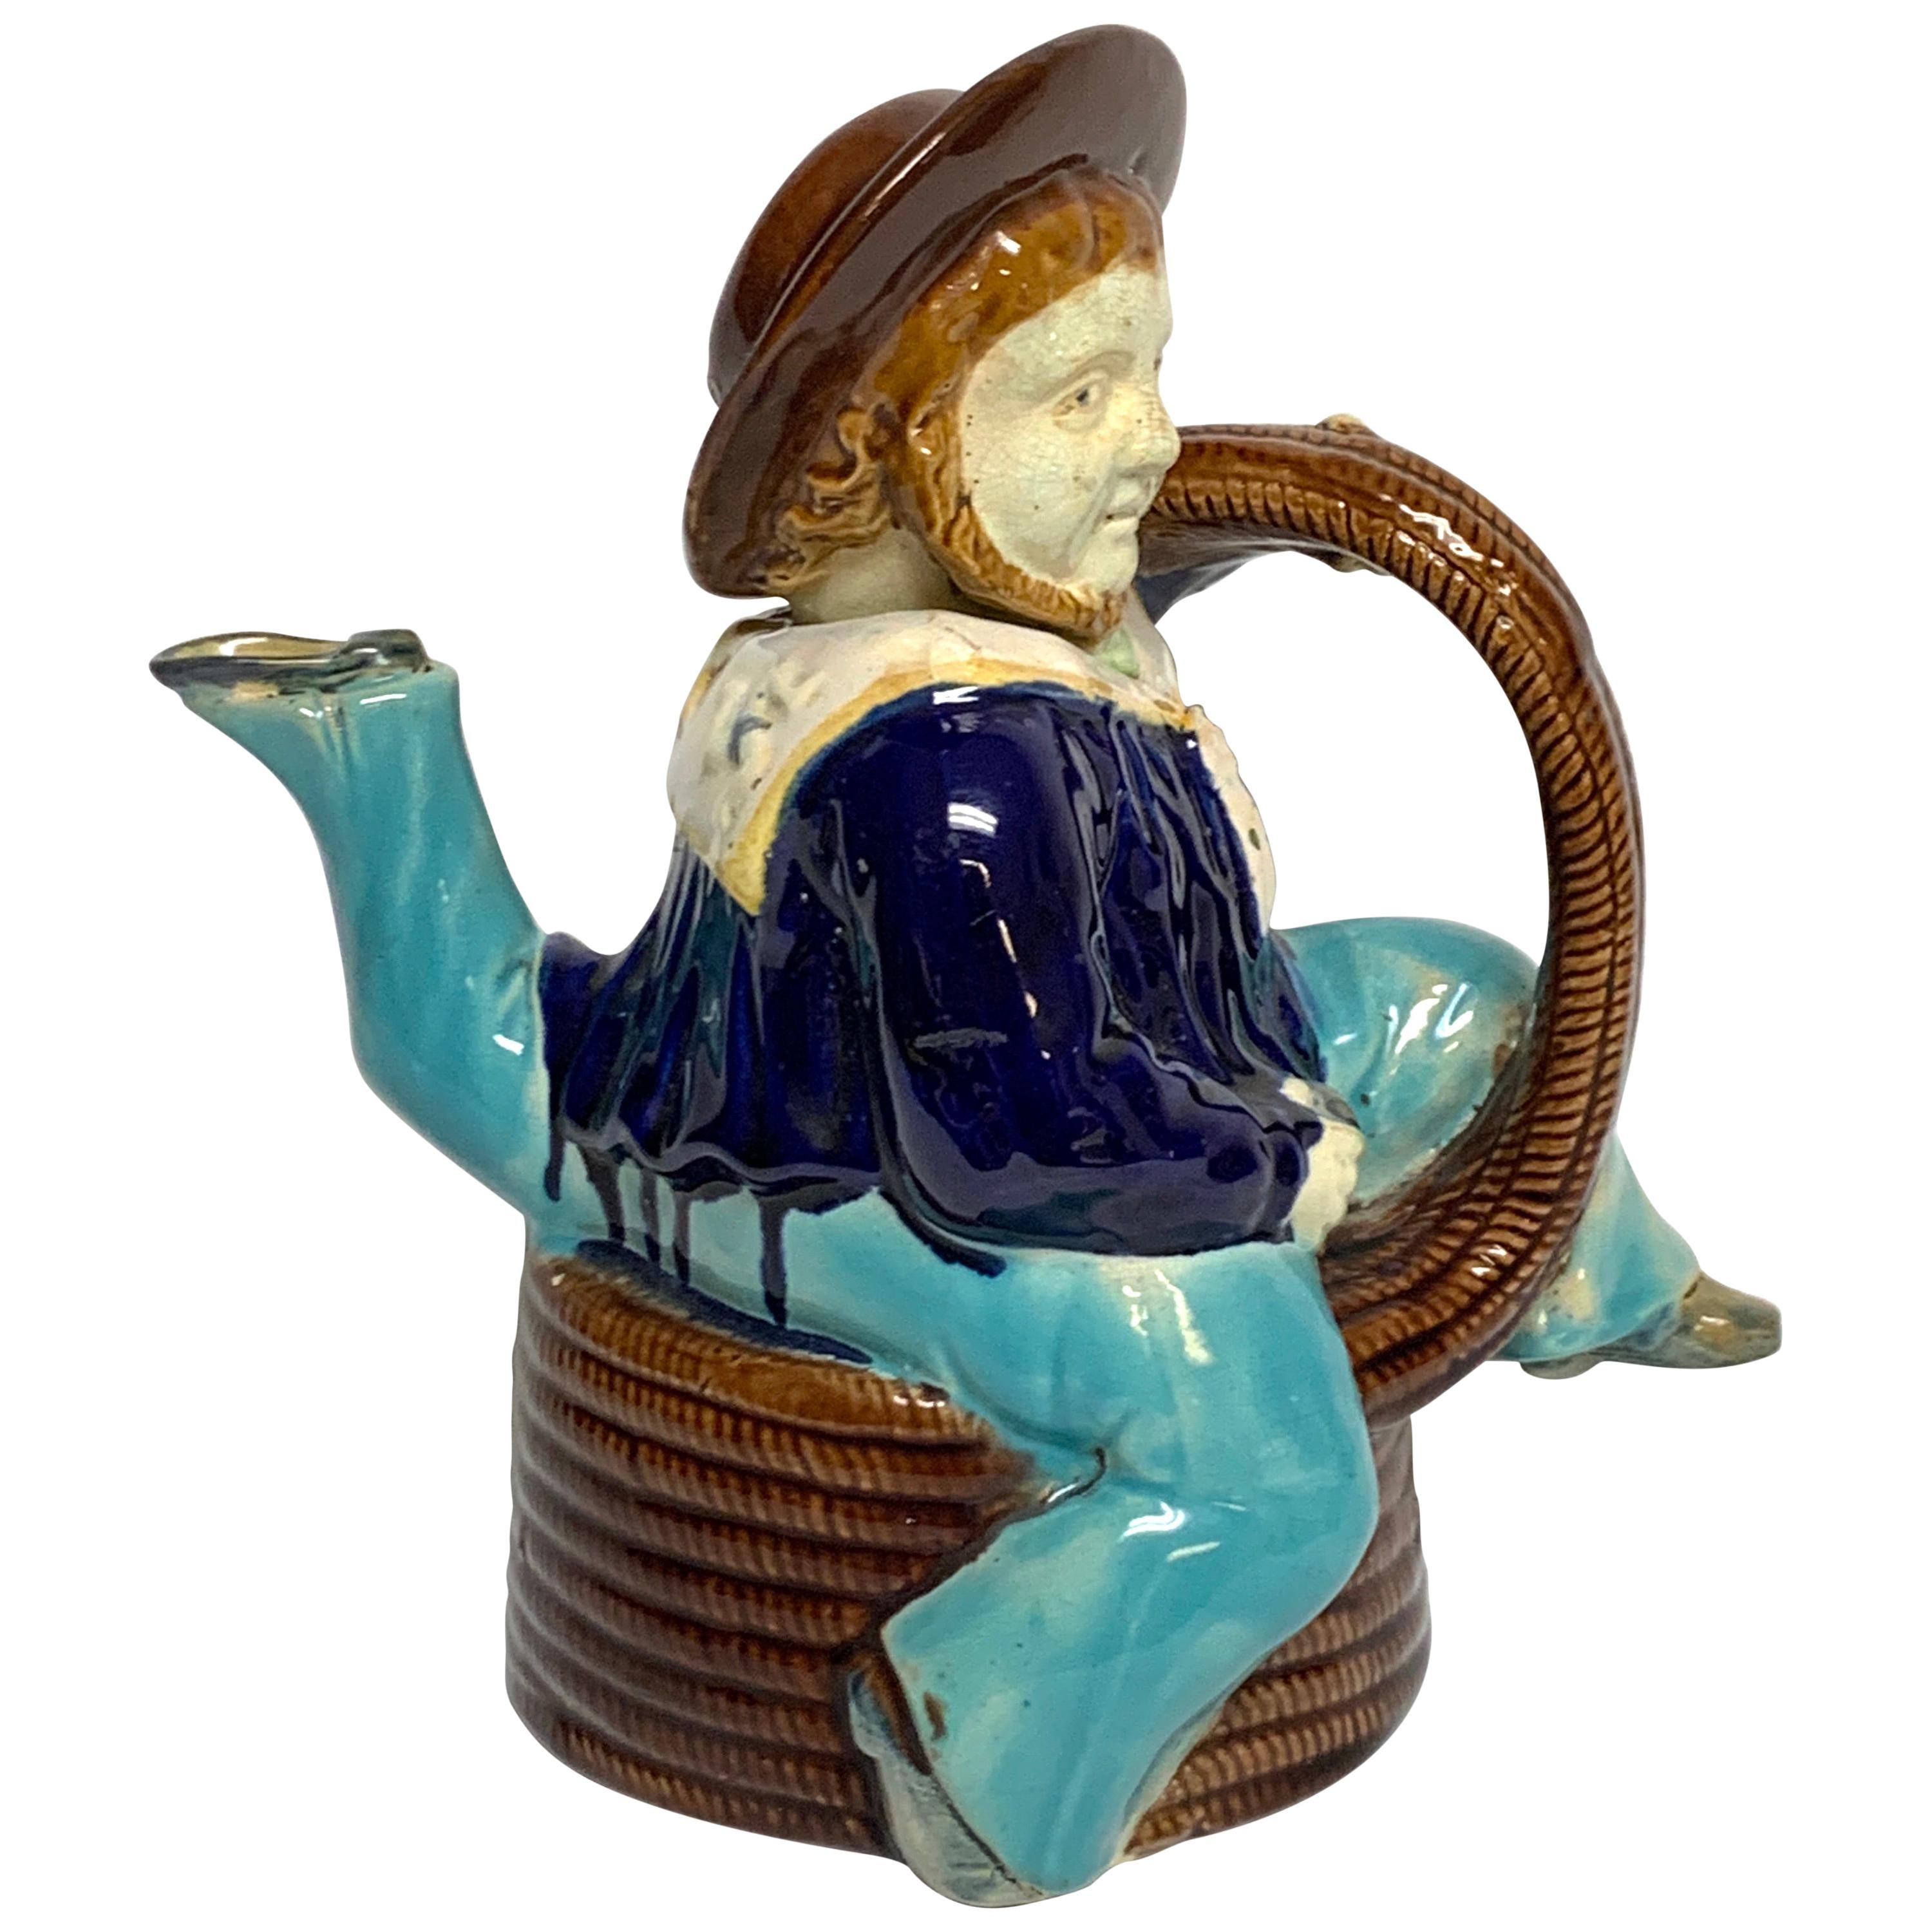 Isle of Man Majolica 'Manx Sailor' Teapot, by William Brownfield & Sons